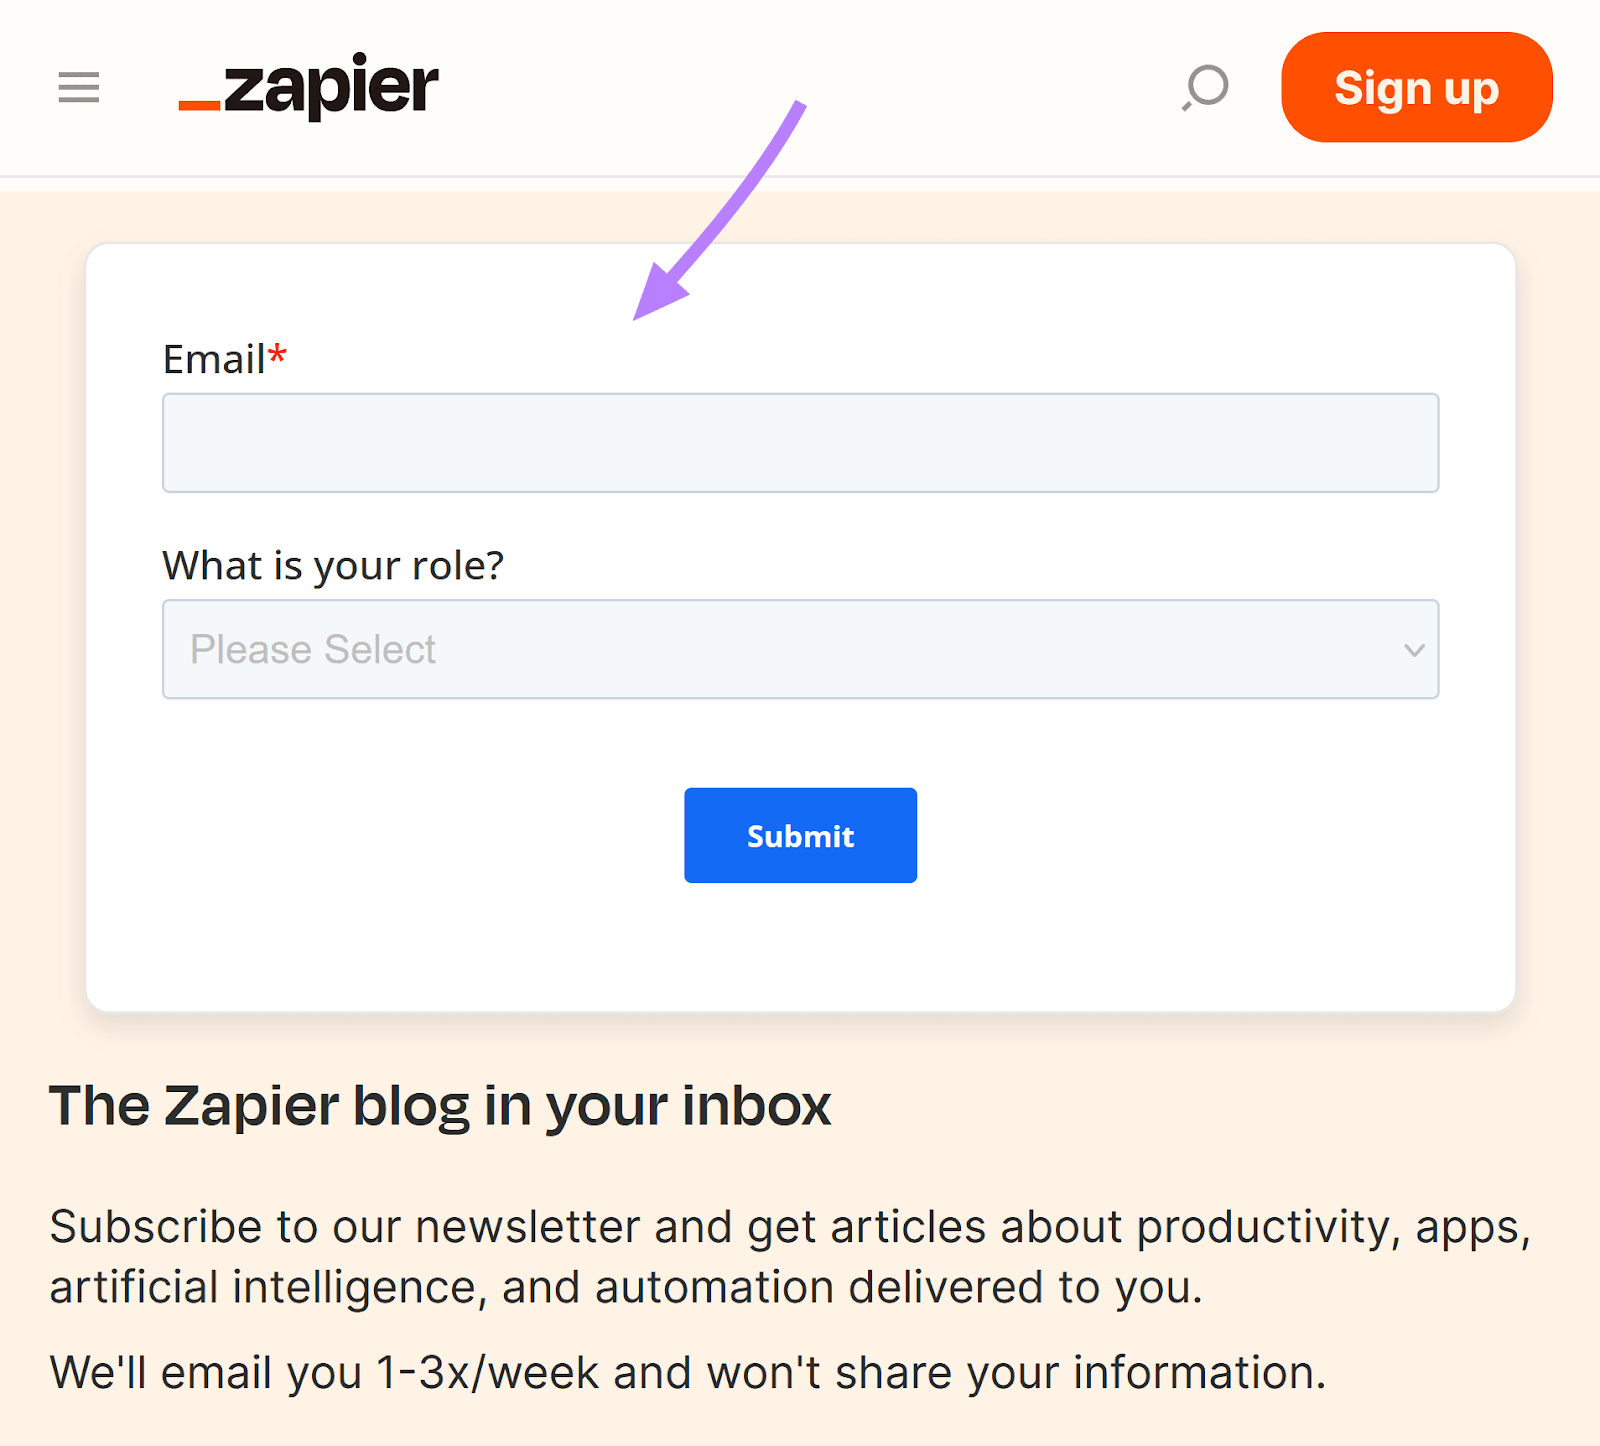 example of simple form with "email" and "what is your role" fields by Zapier